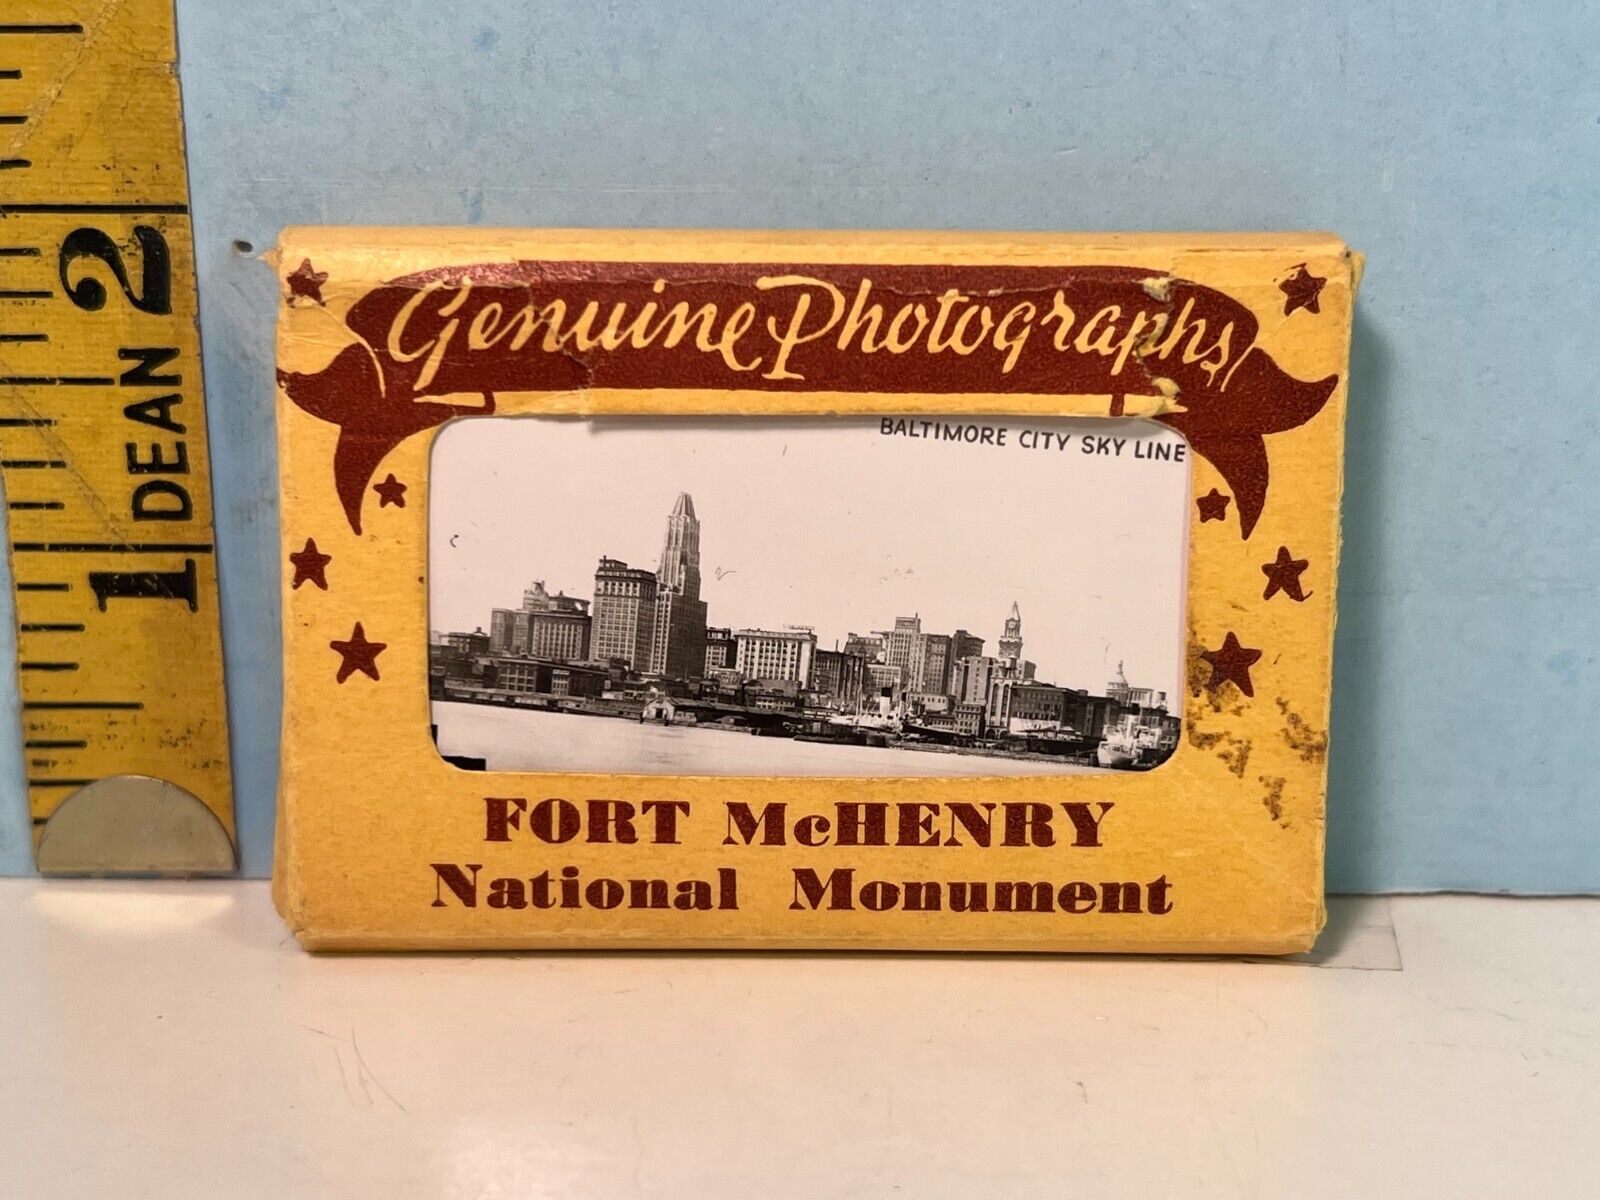 Genuine Photographs of Fort McHenry National Monument Grogan Photo Company